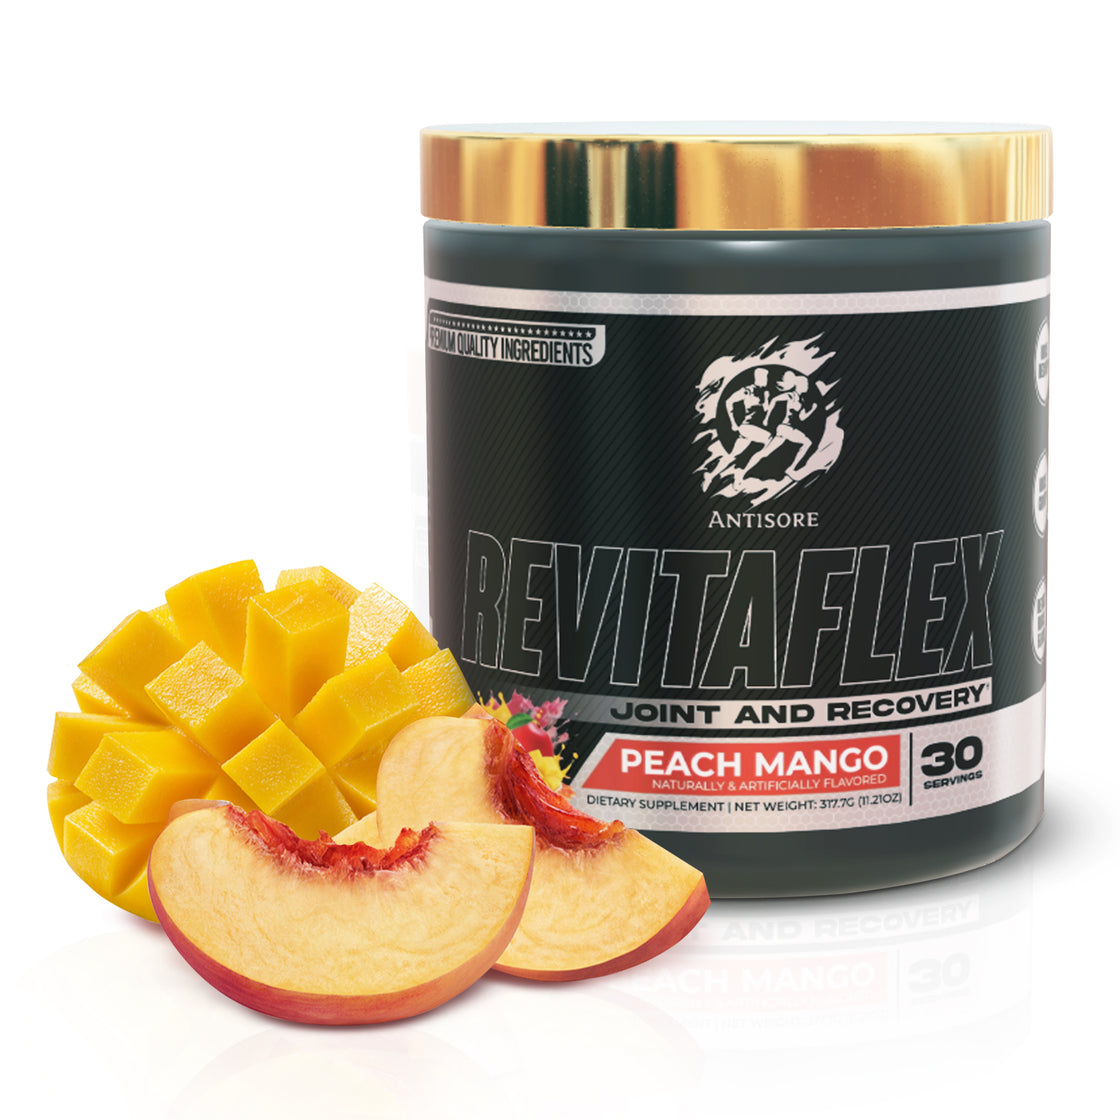 AntiSore Revitaflex Peach Mango flavor Joint and Recovery - My Store